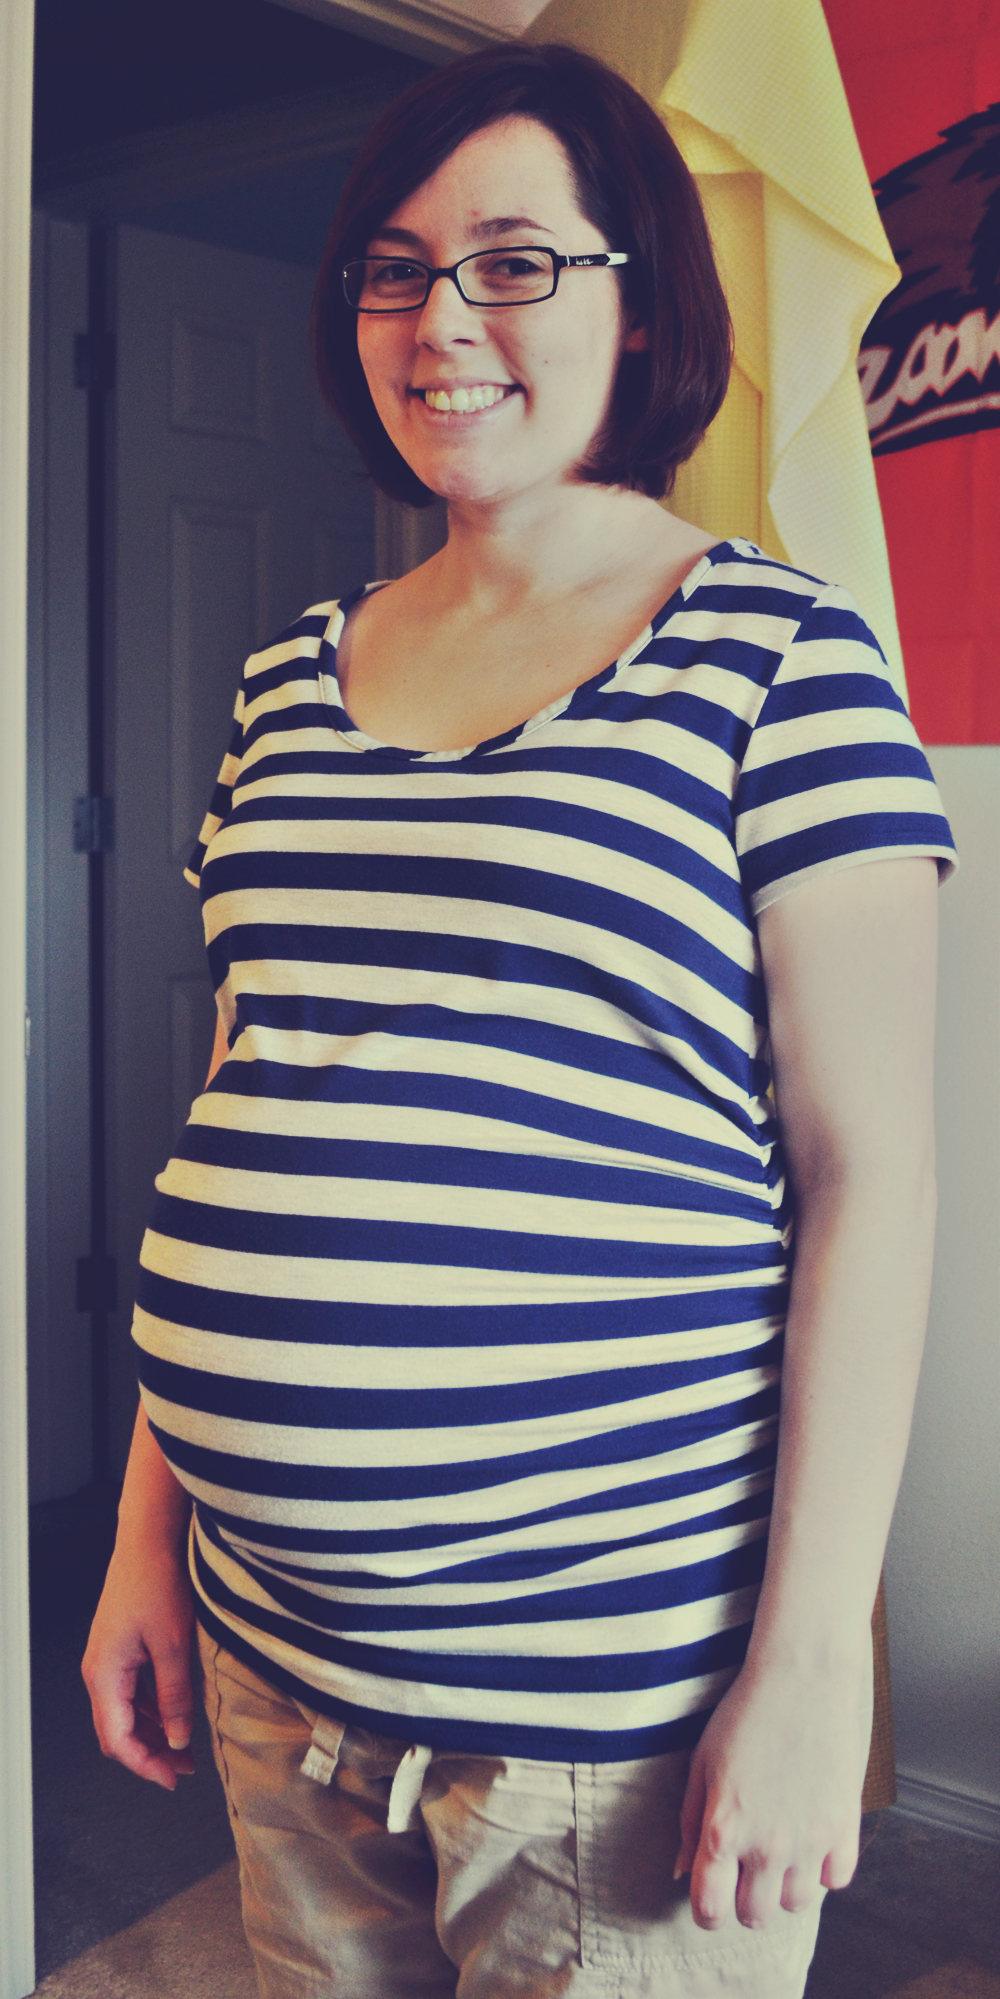 37 weeks pregnant - belly pic